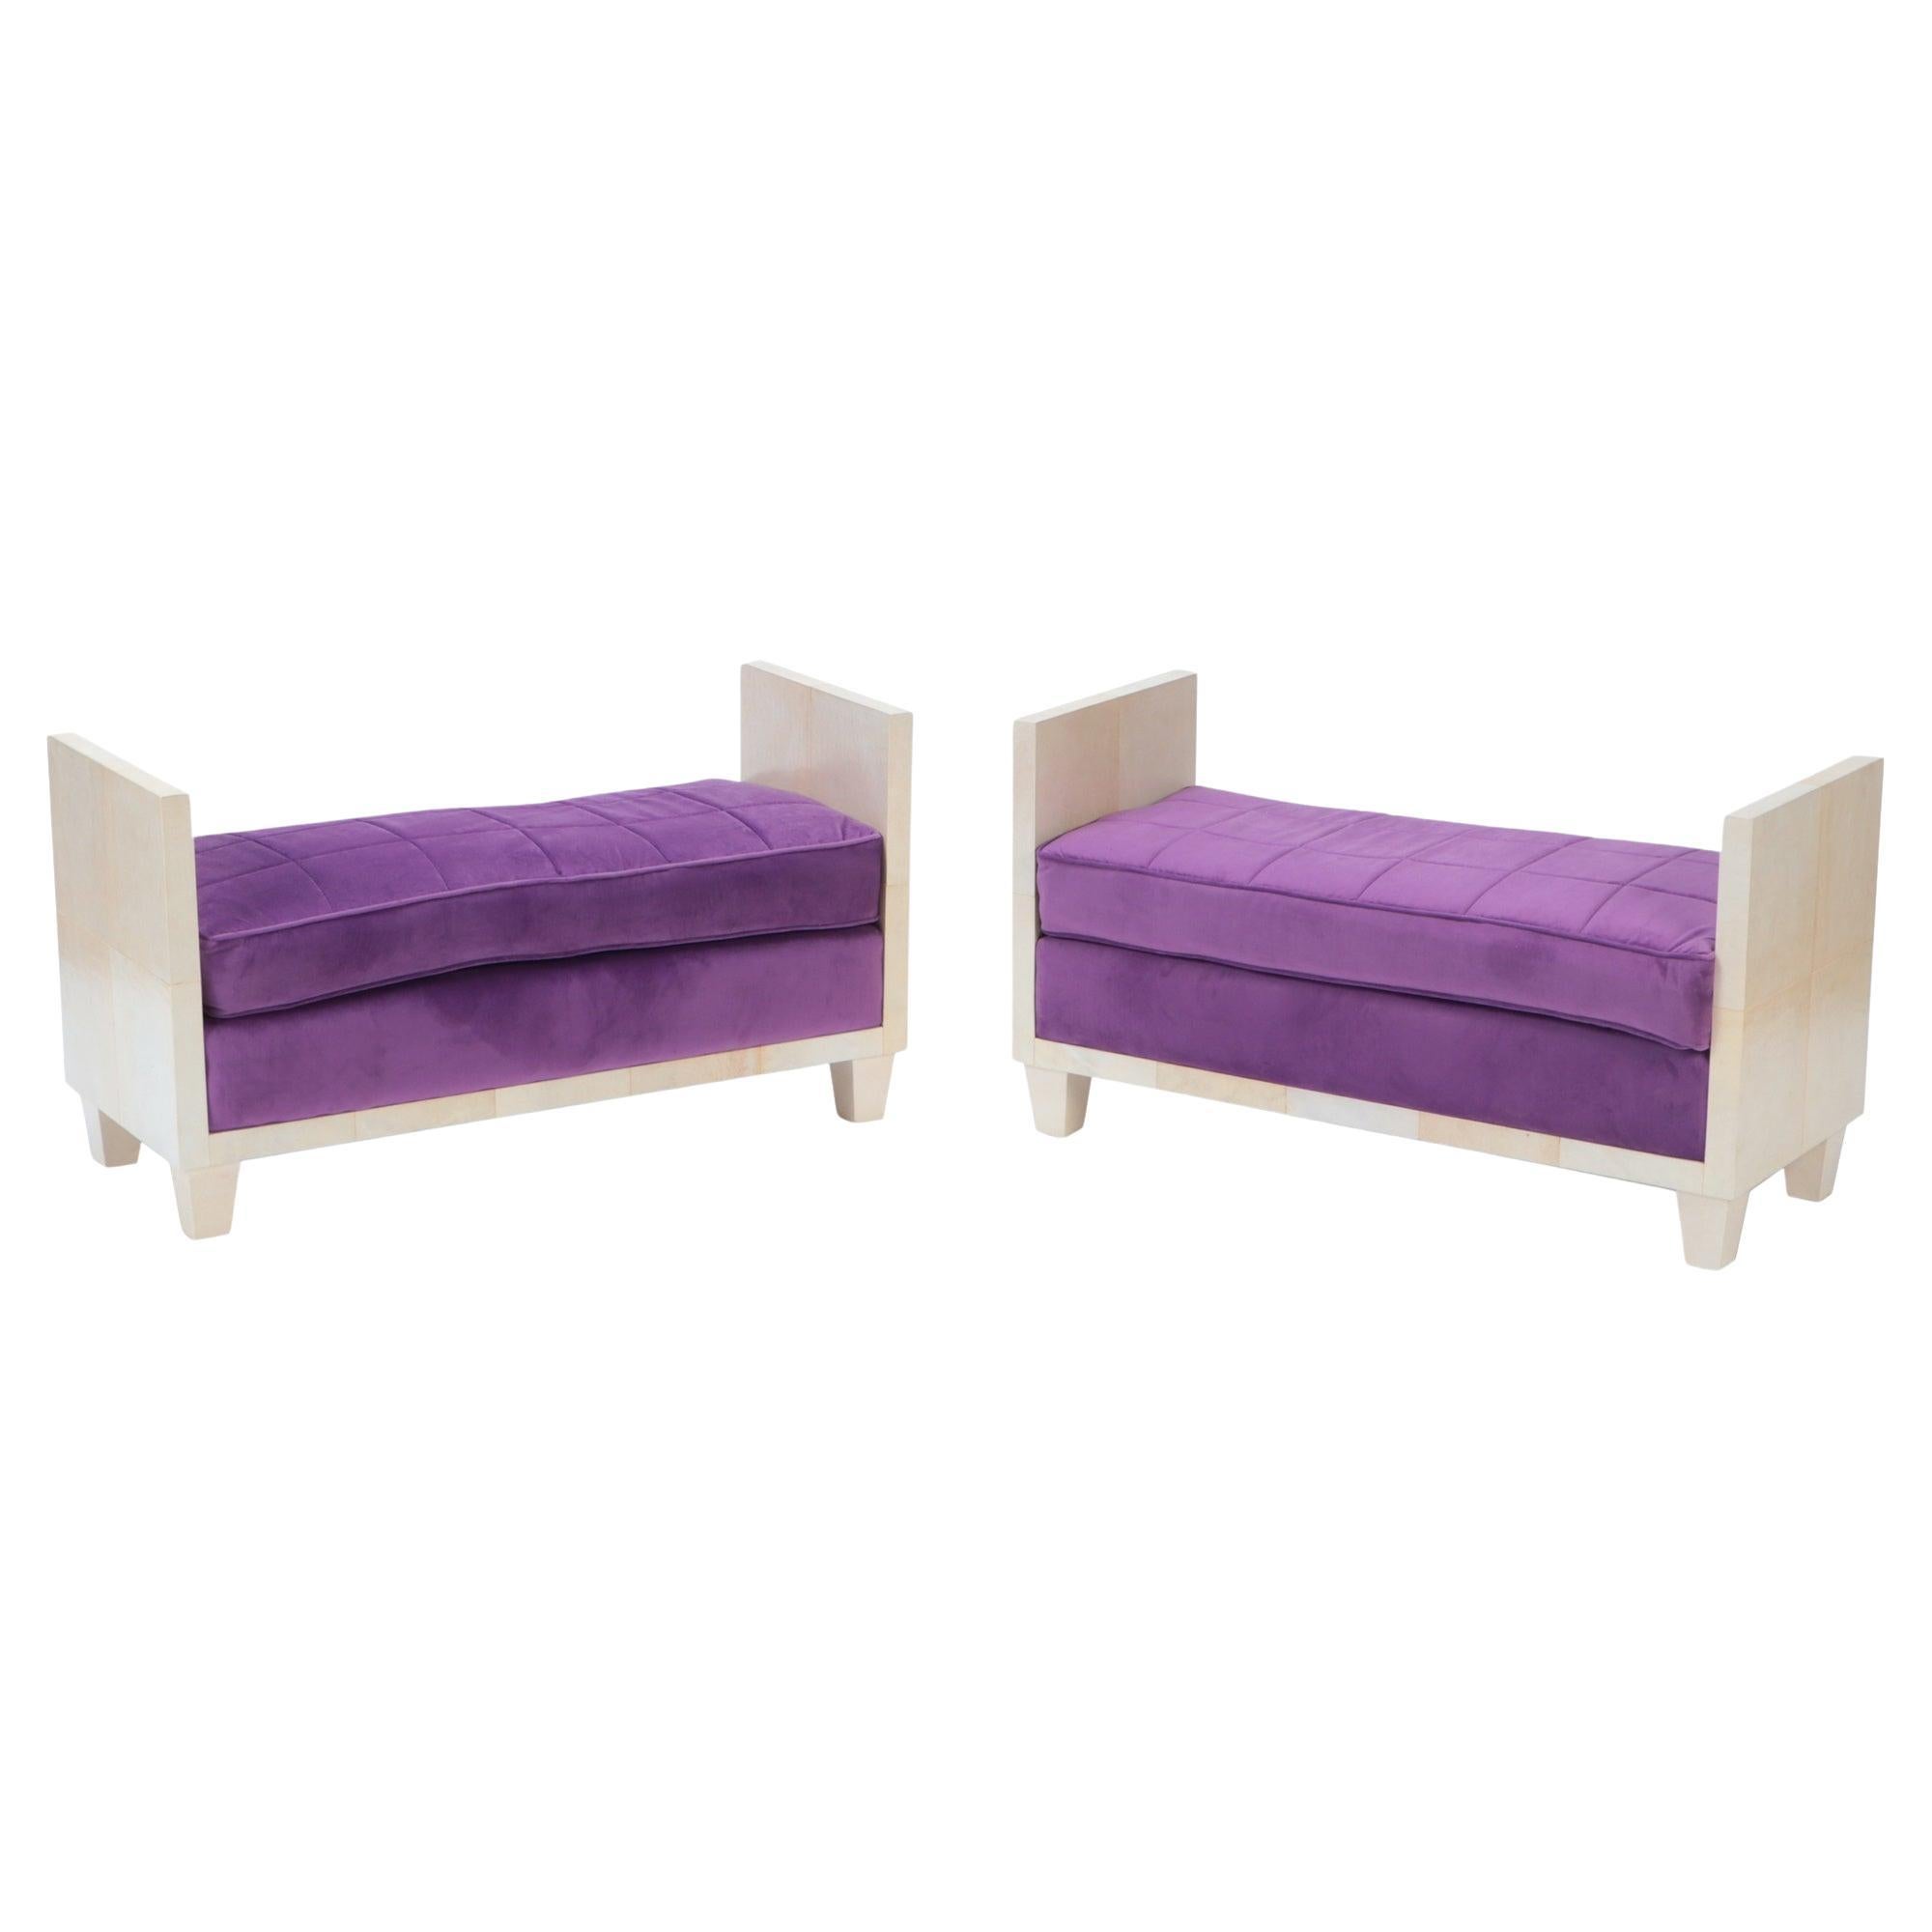 Pair of Parchment Upholstered Benches, Contemporary